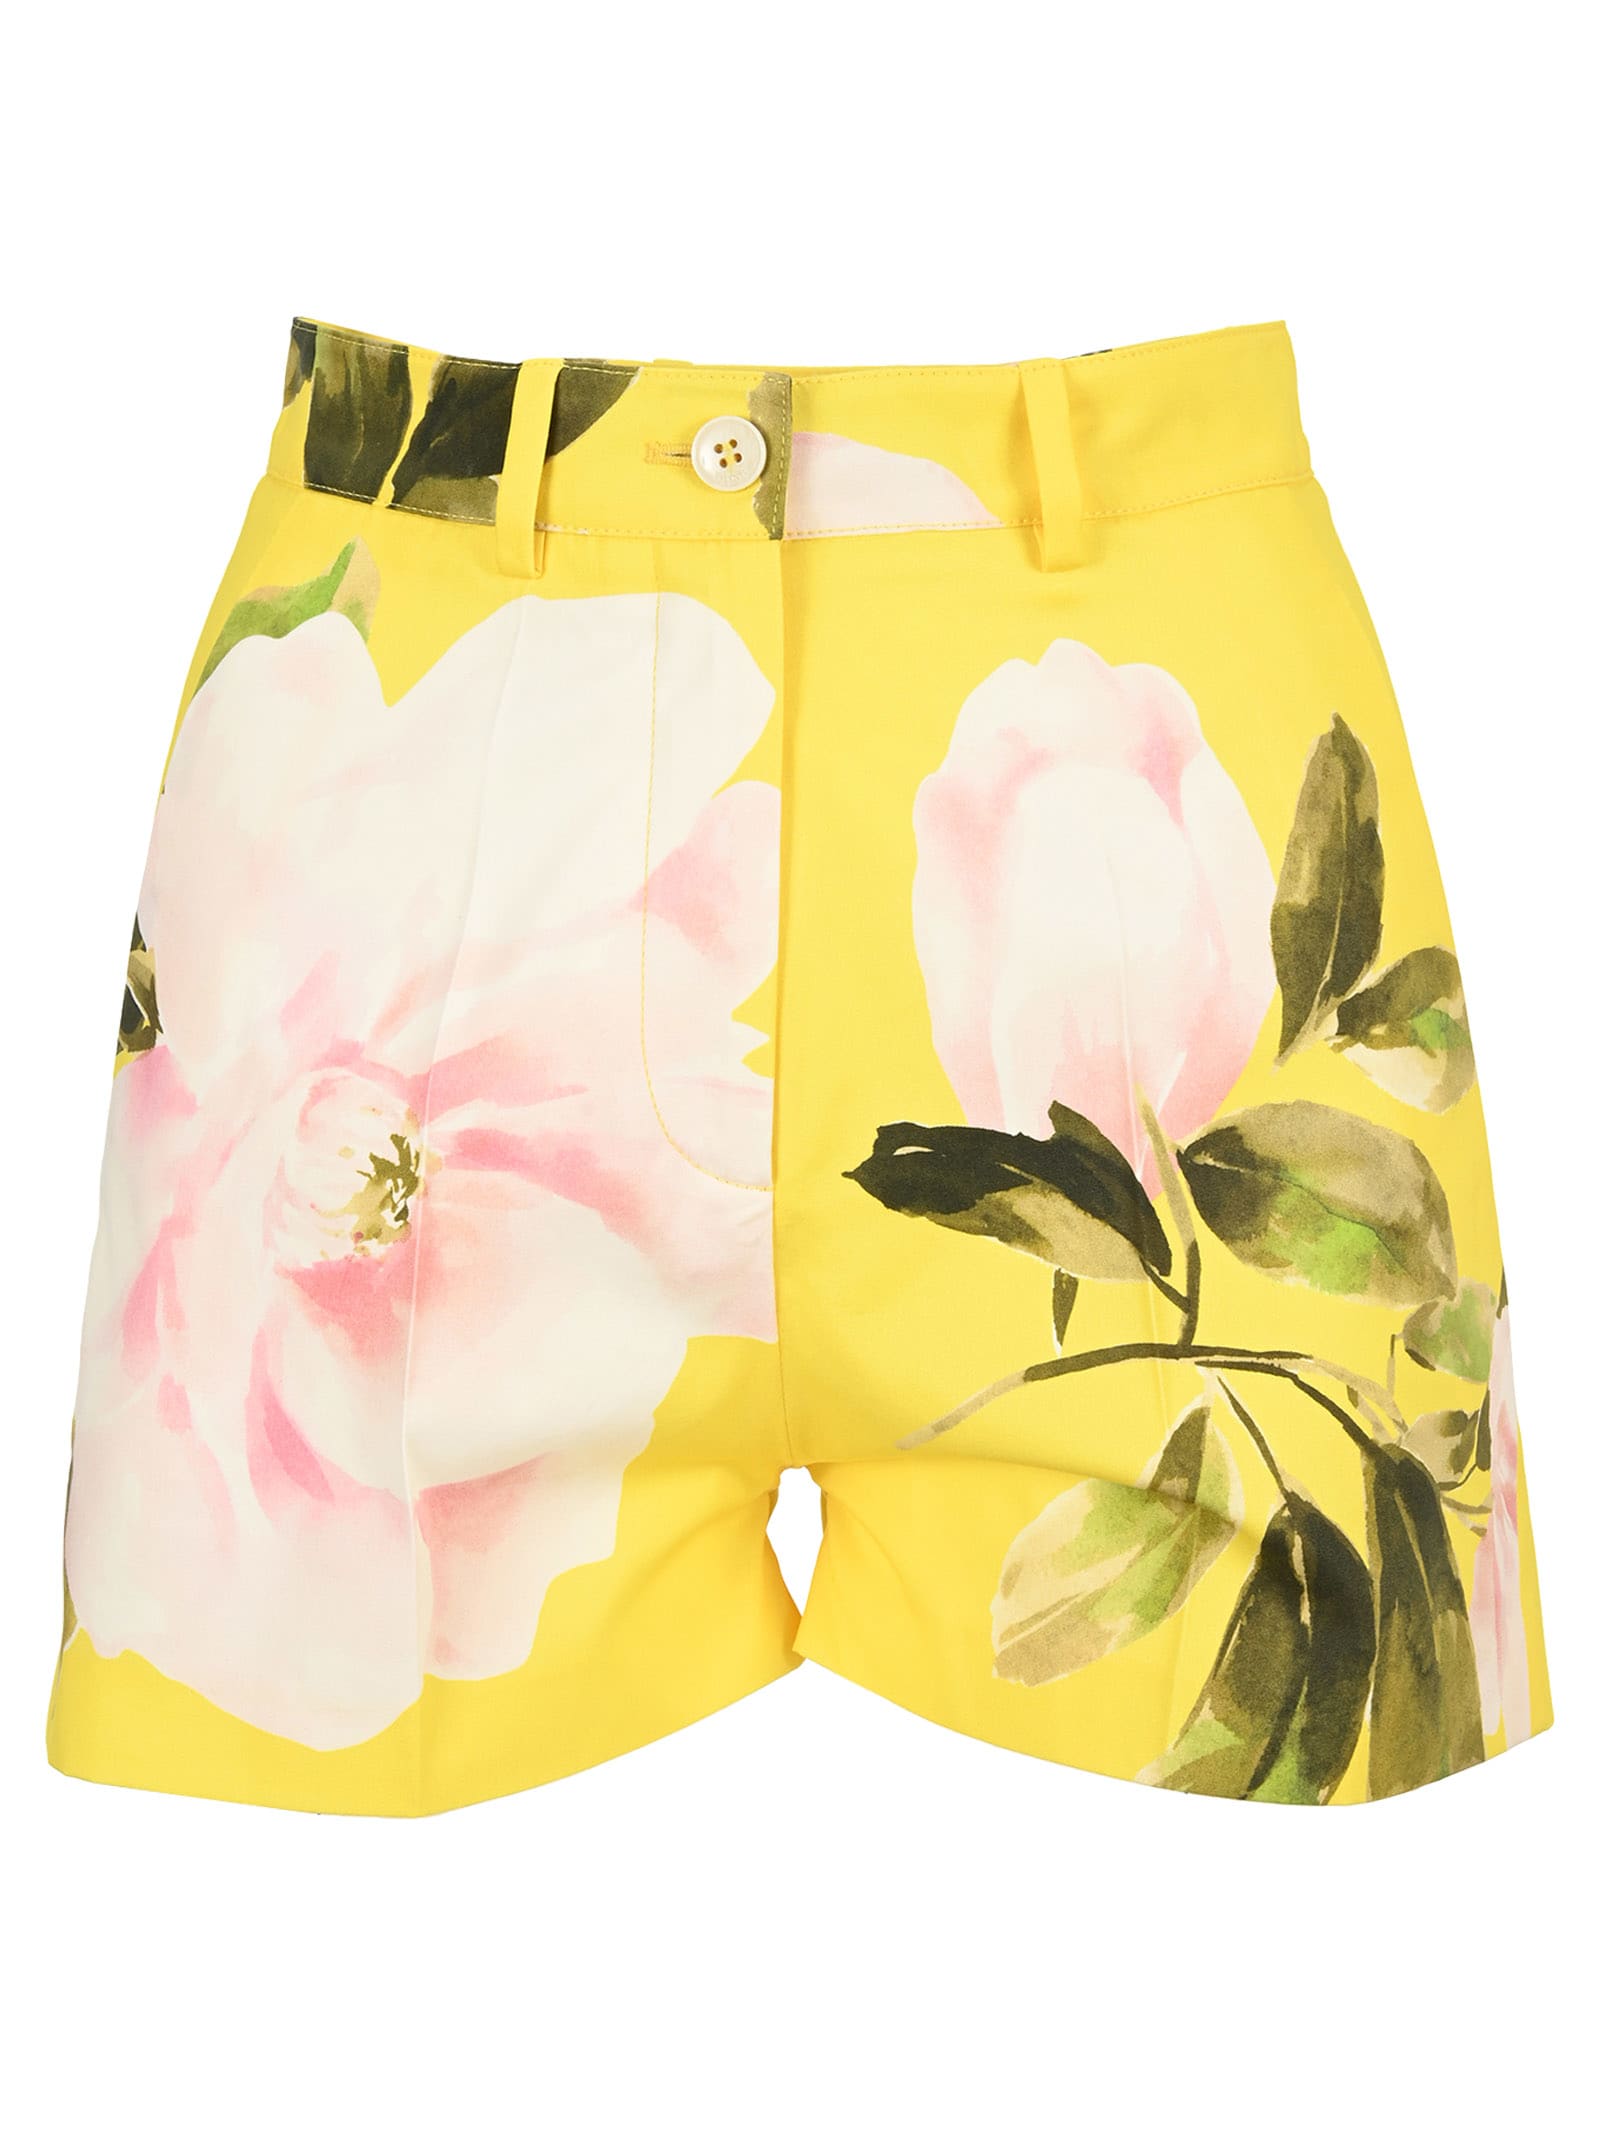 Buy Valentino Printed Silk Shorts online, shop Valentino shoes with free shipping